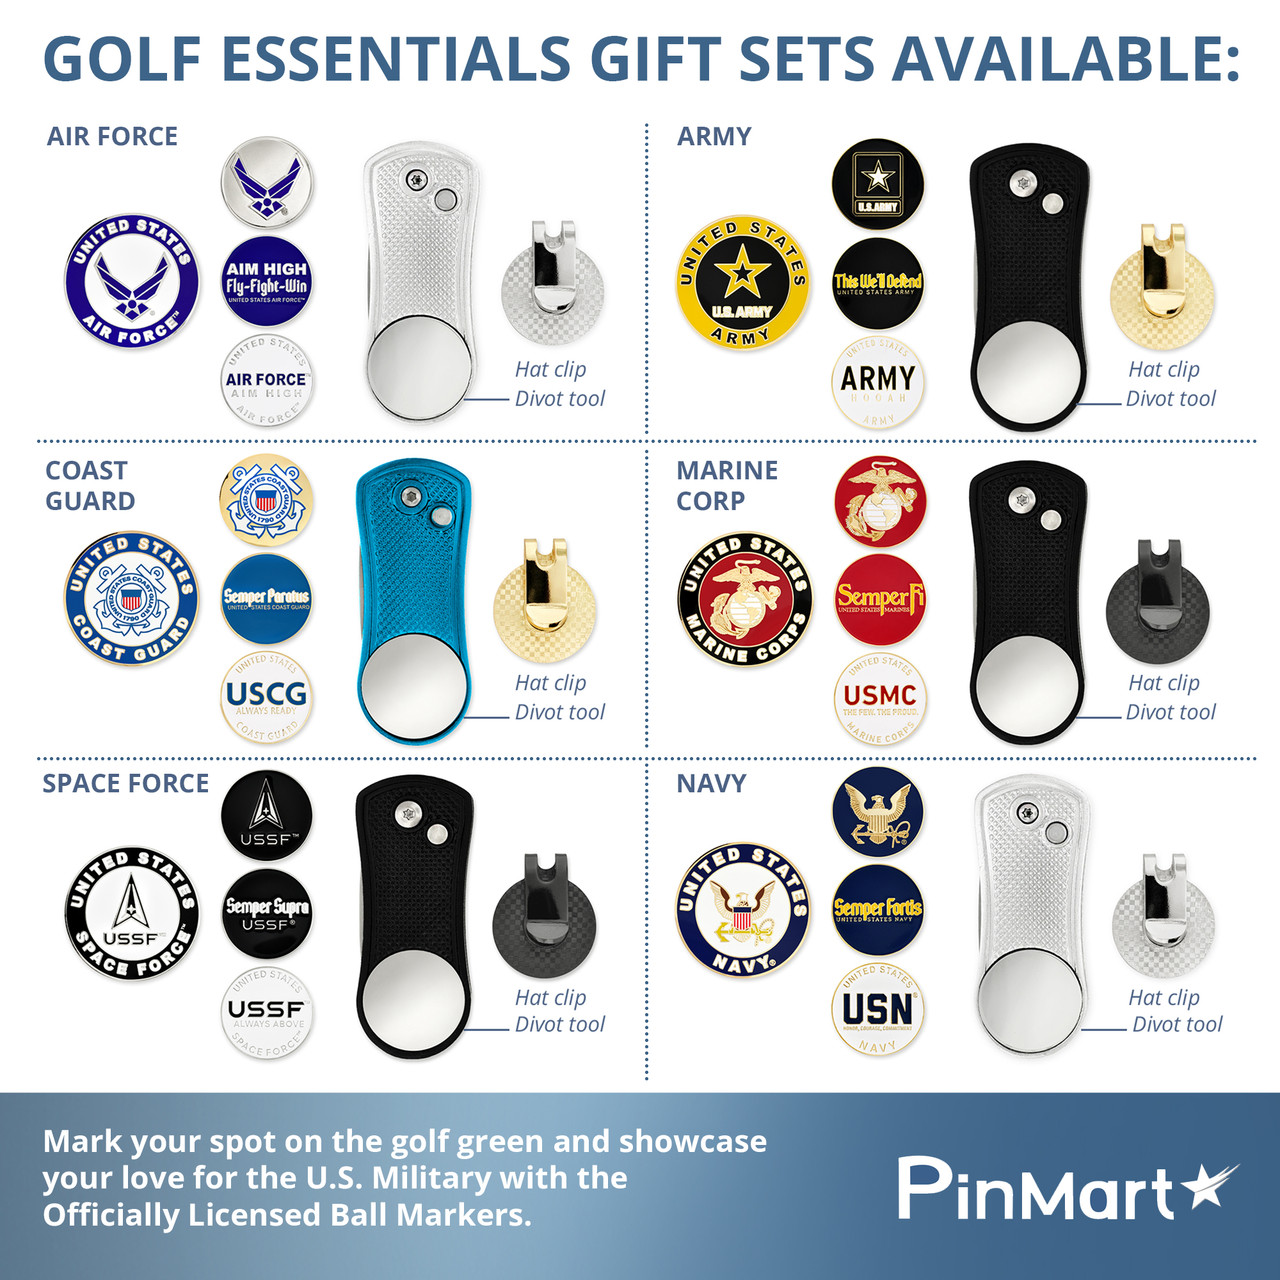 Officially Licensed U.S.M.C. 6-PC Golf Gift Set - PinMart